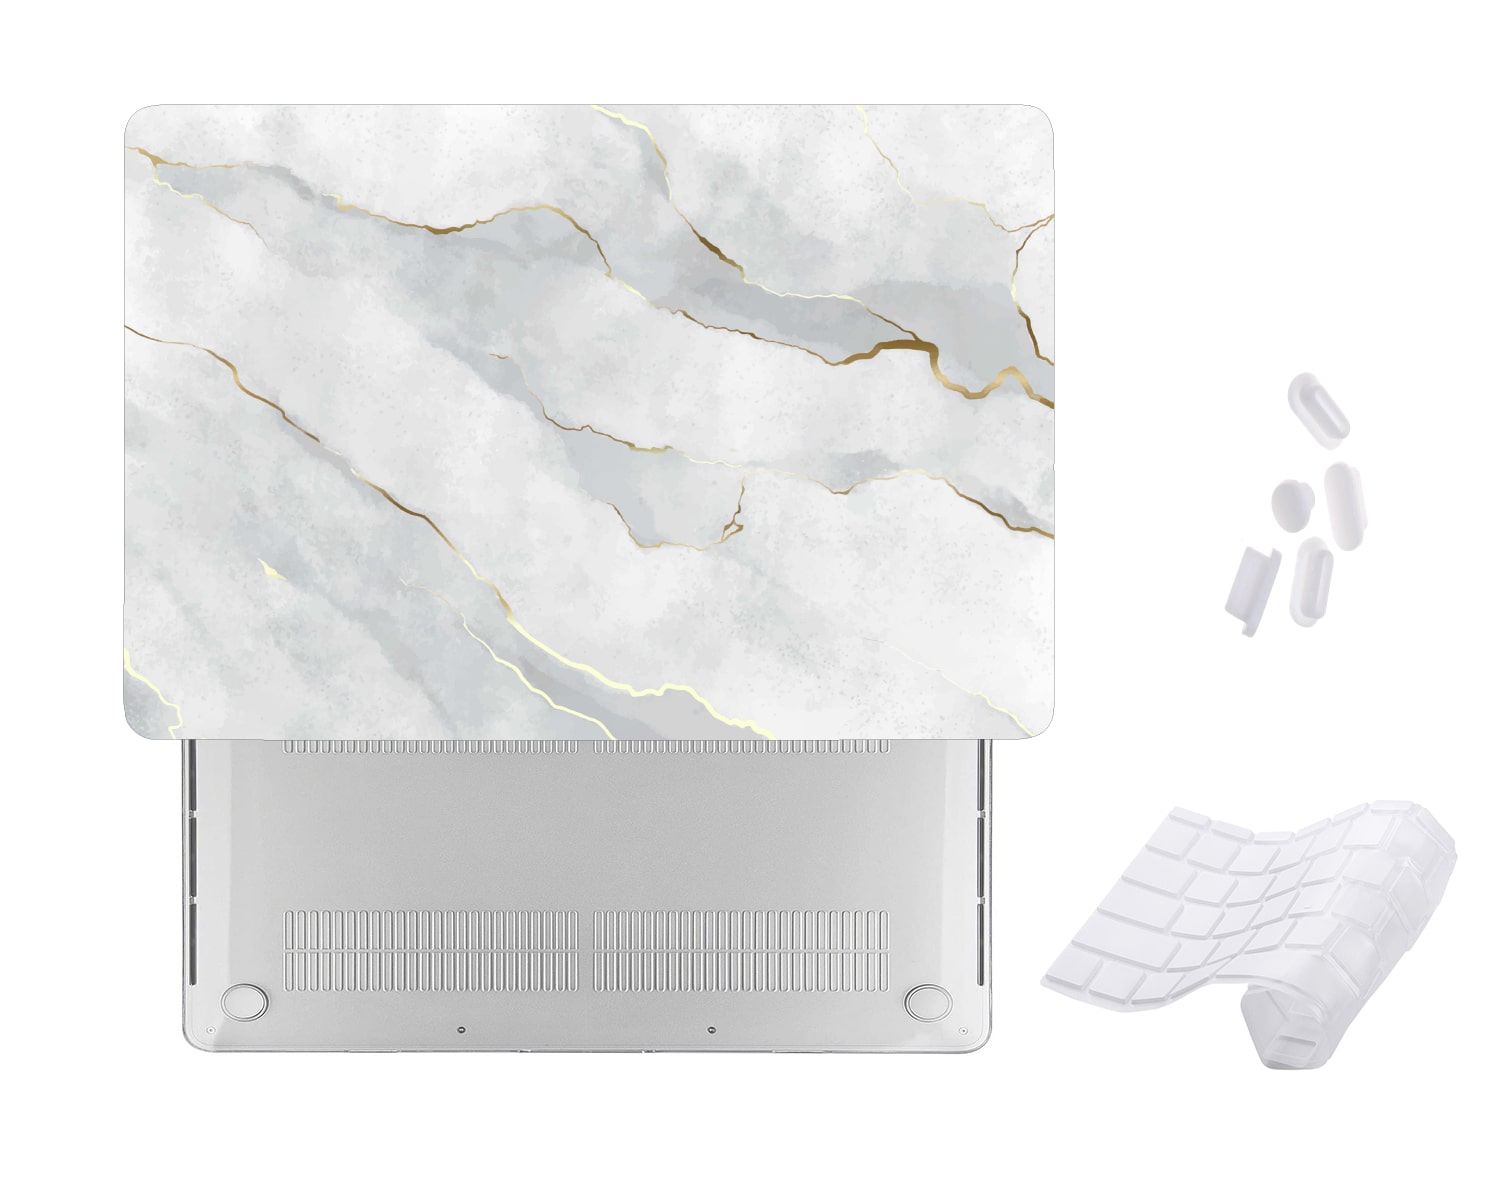 Case Cover for Macbook - White Grey Marble Design